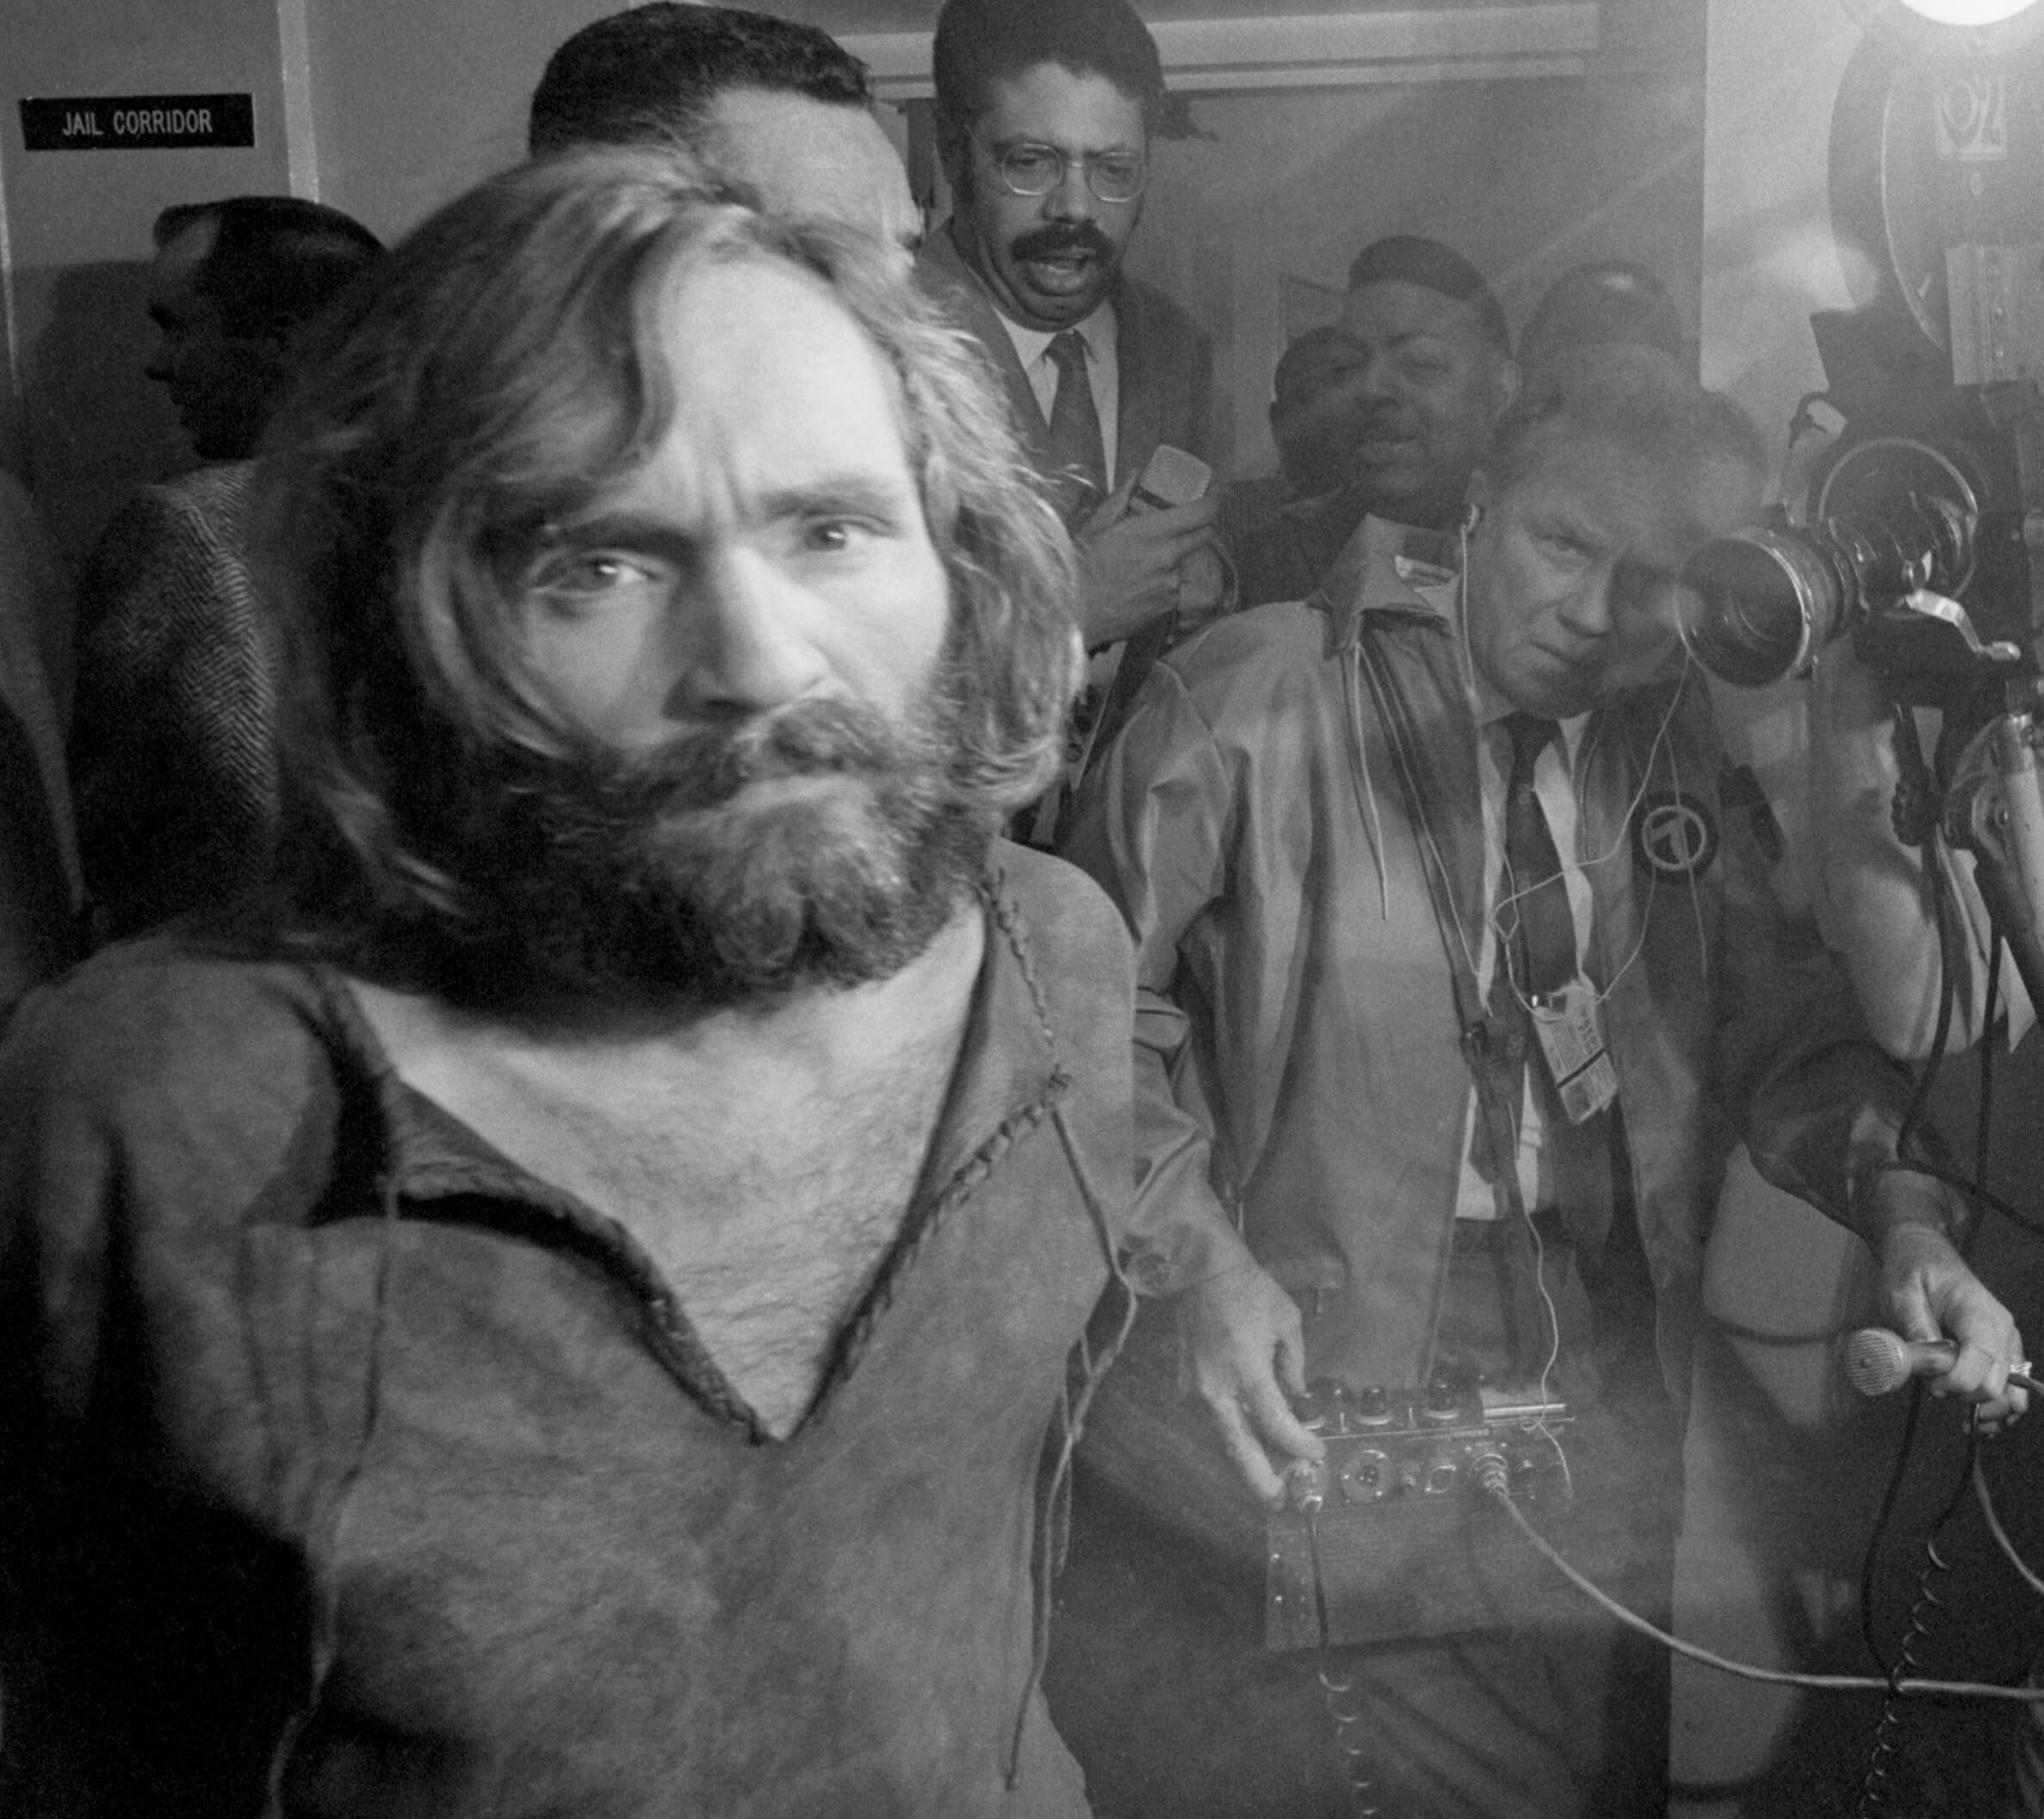 Charles Manson and a crowd